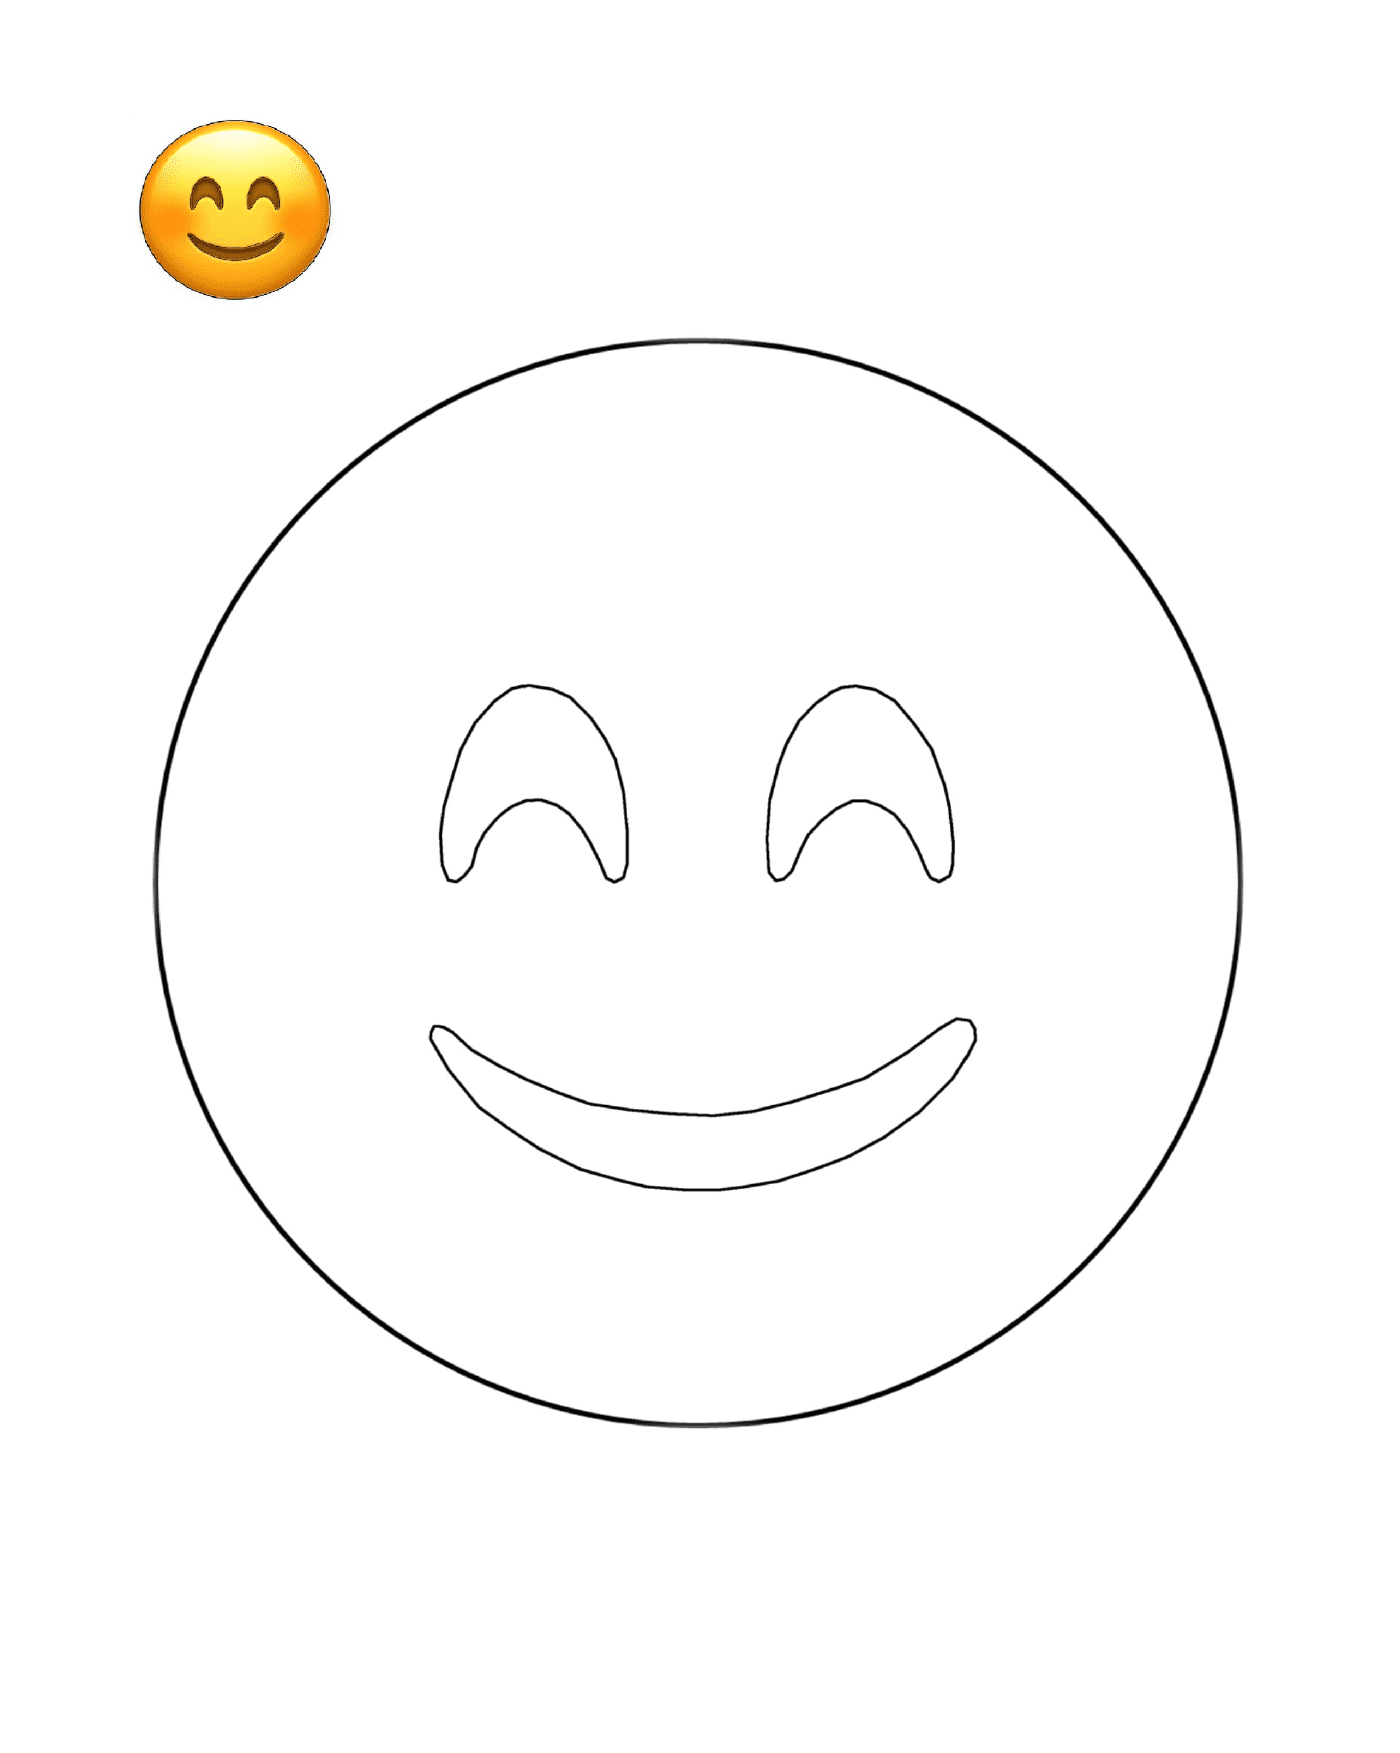  A smiling face is drawn 